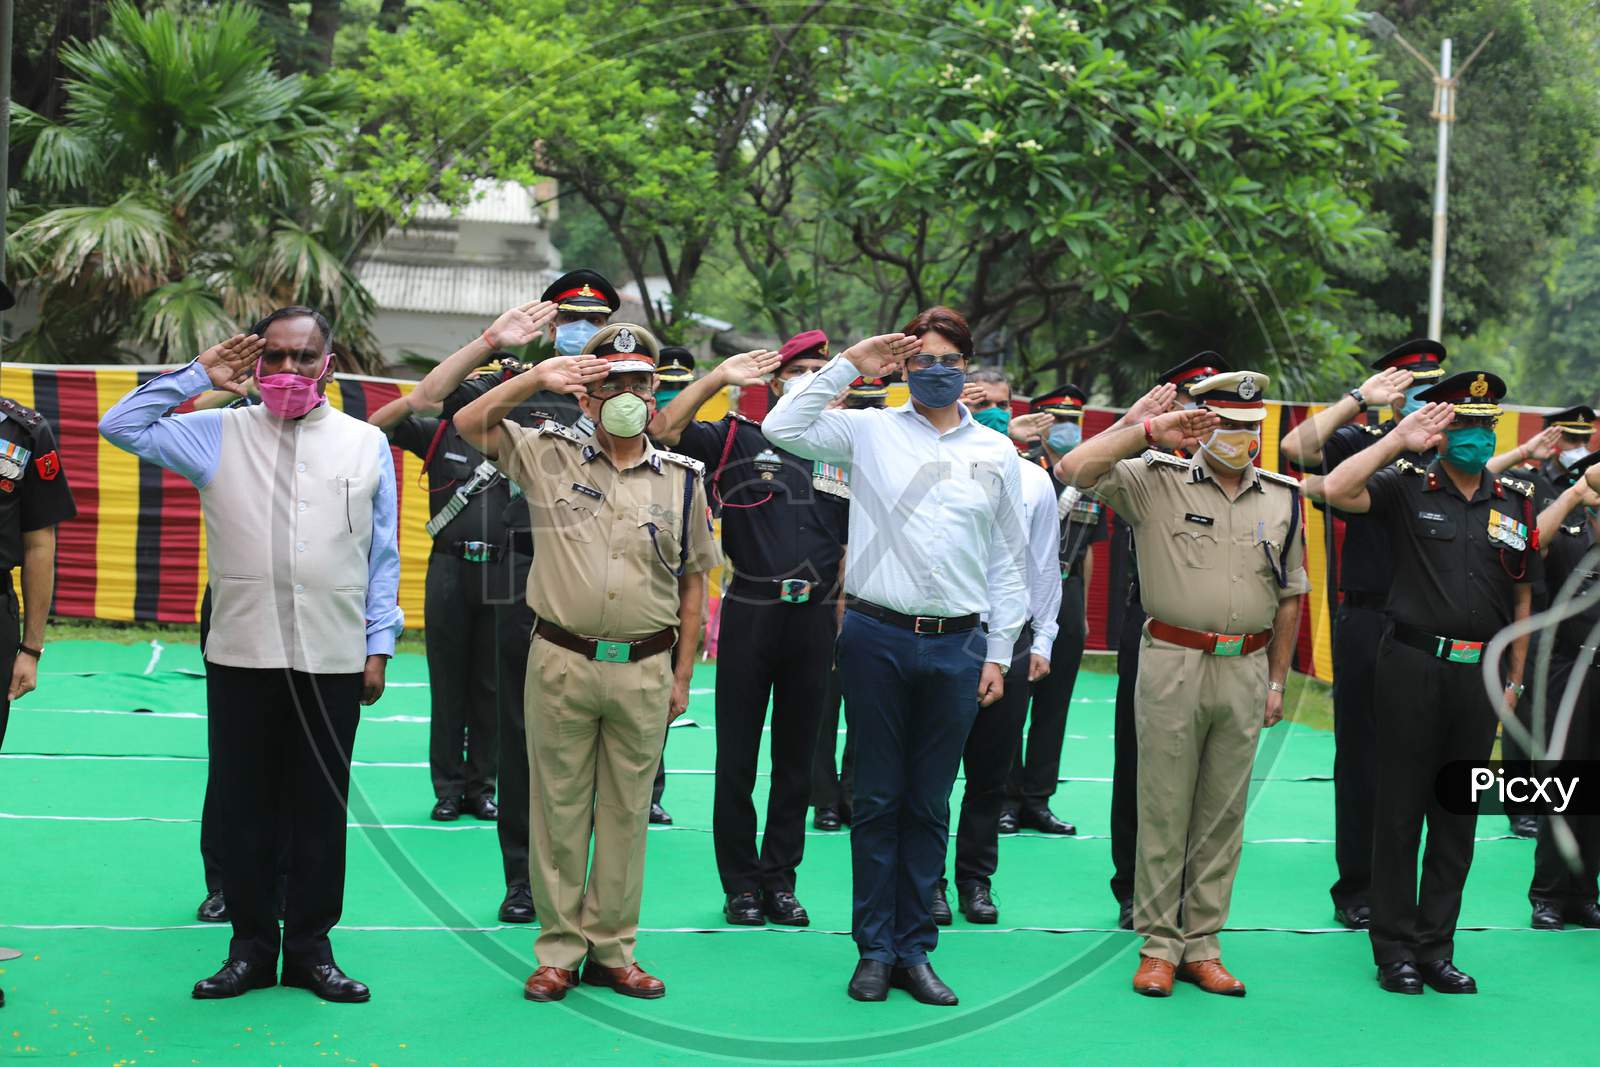 Officials Salute to the mortal remains of N K Deepak Singh, An Indian Soldier Who Was Killed In A Border Clash With Chinese Troops In Ladakh Region, at Military Hospital, Prayagraj, June 21,2020.